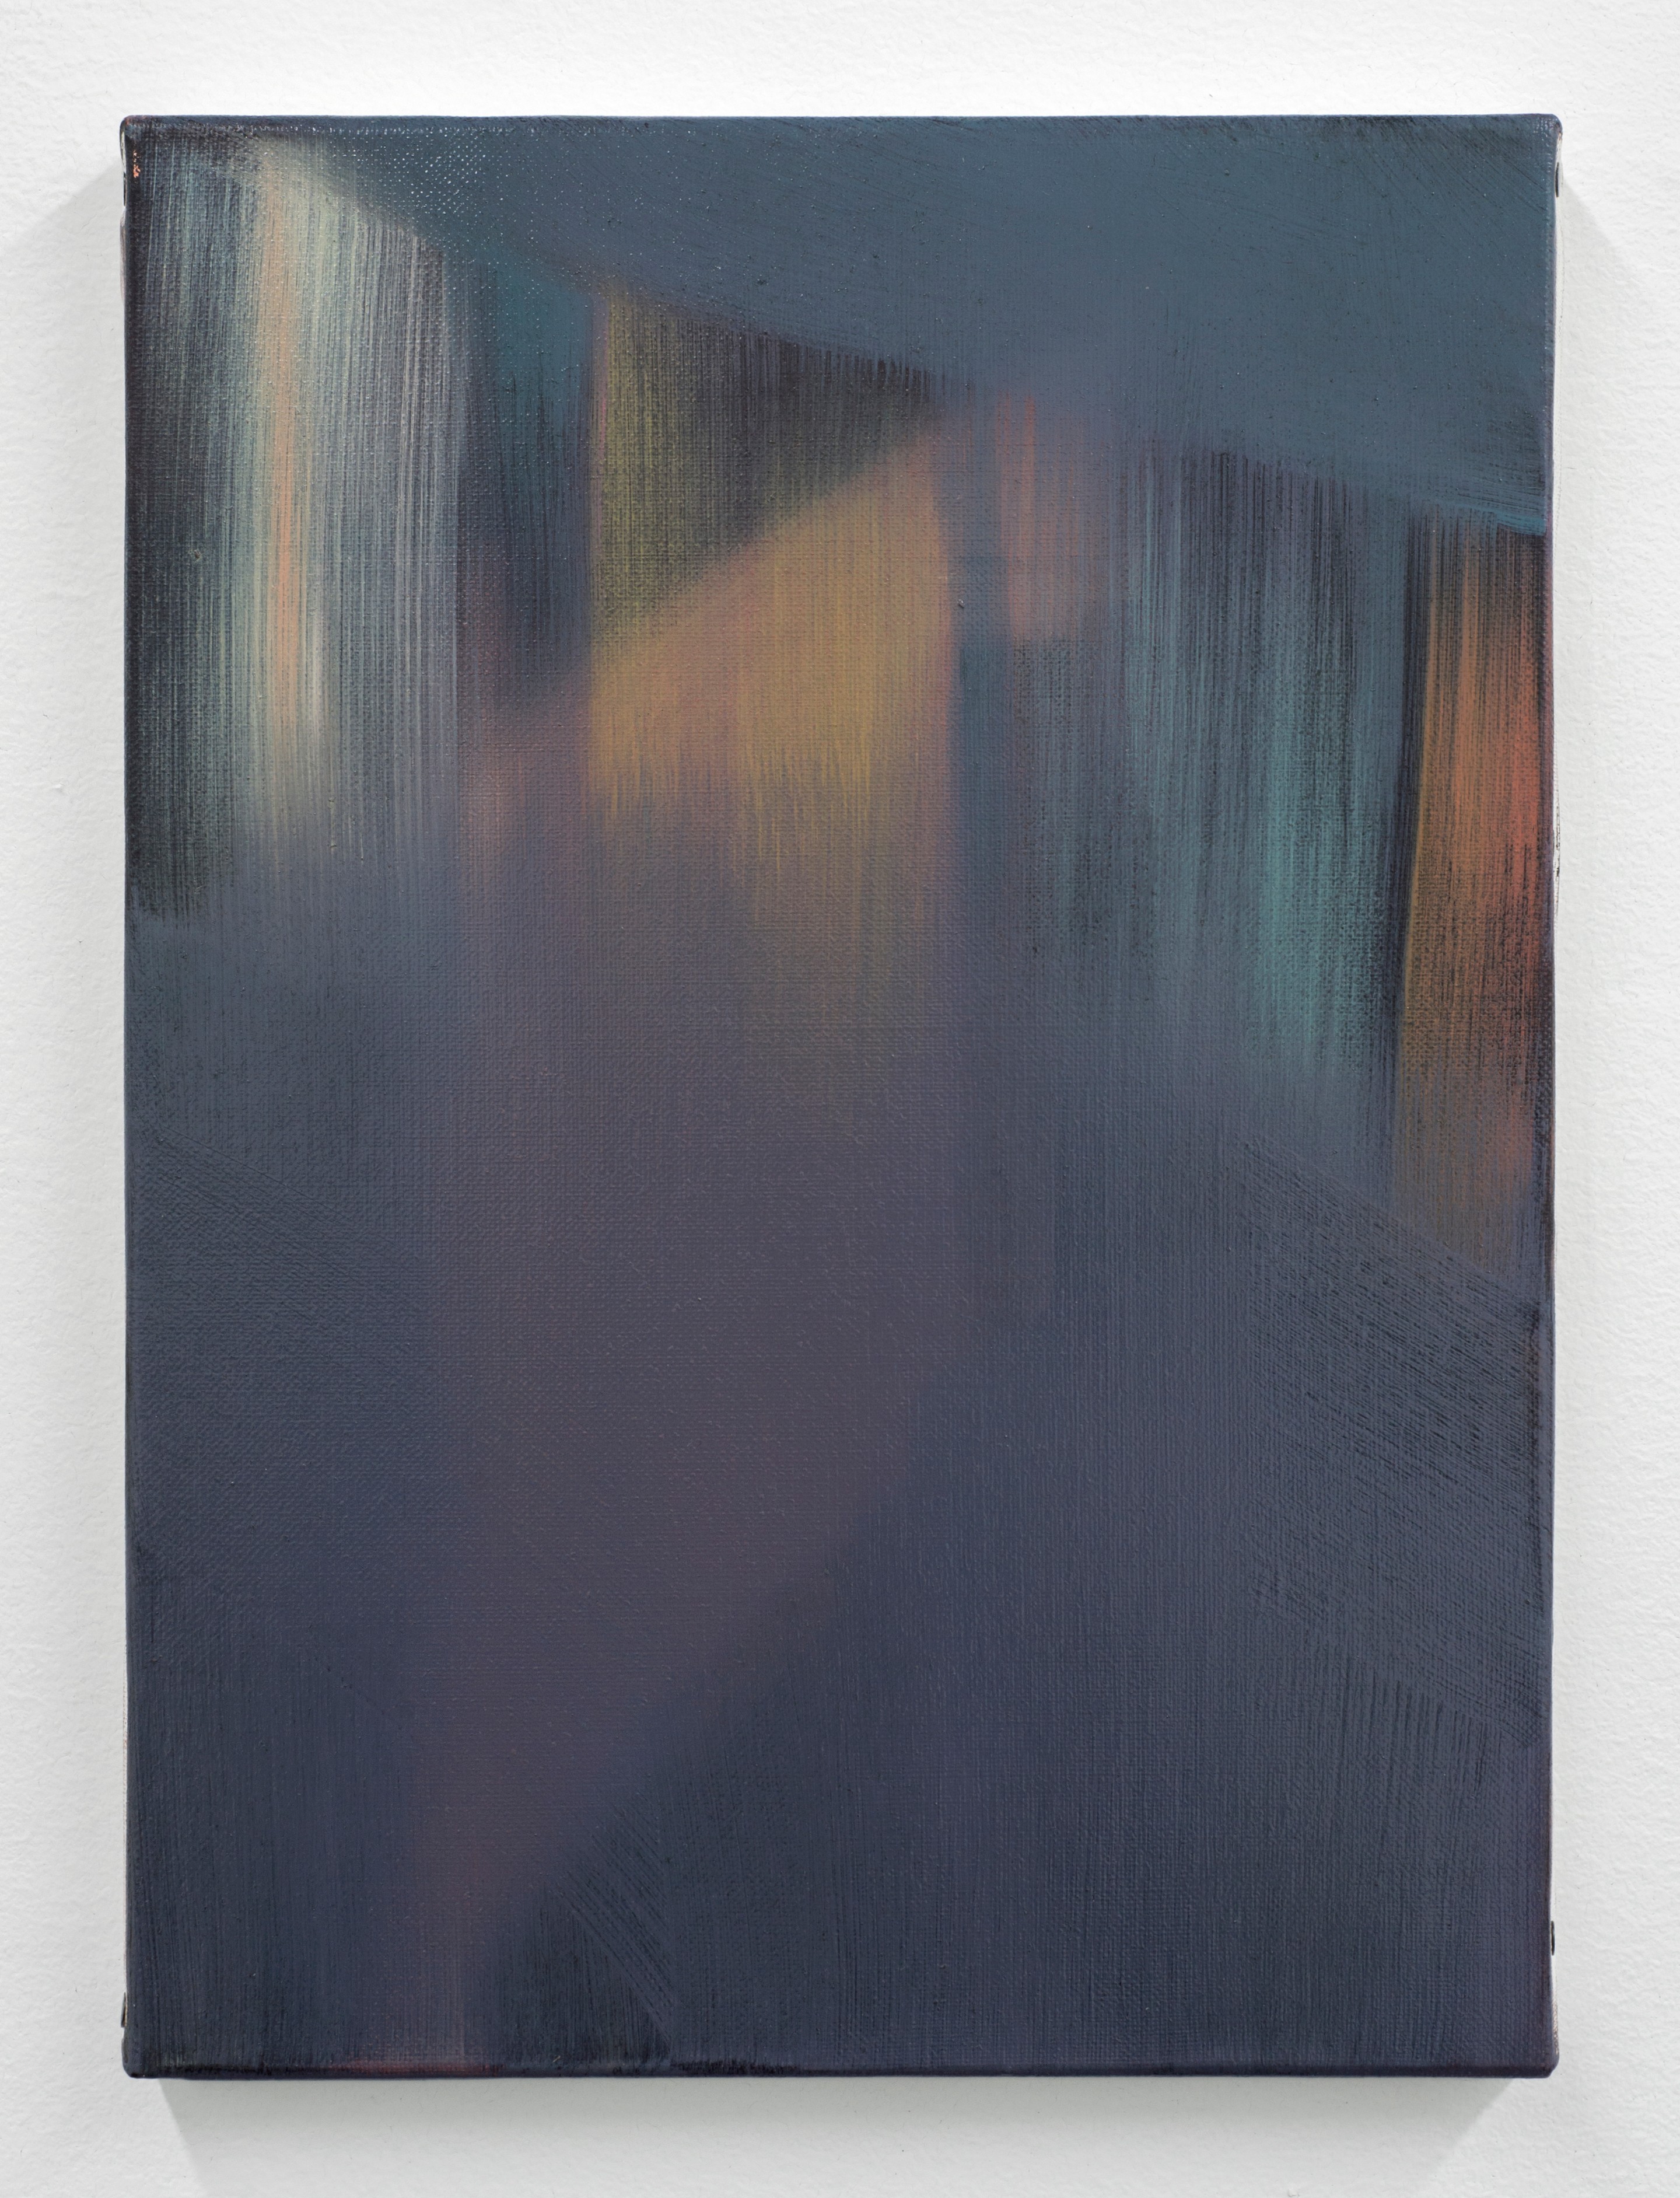 Untitled (2013)
Oil on linen. 

13 x 9.4 in (33 x 24 cm)